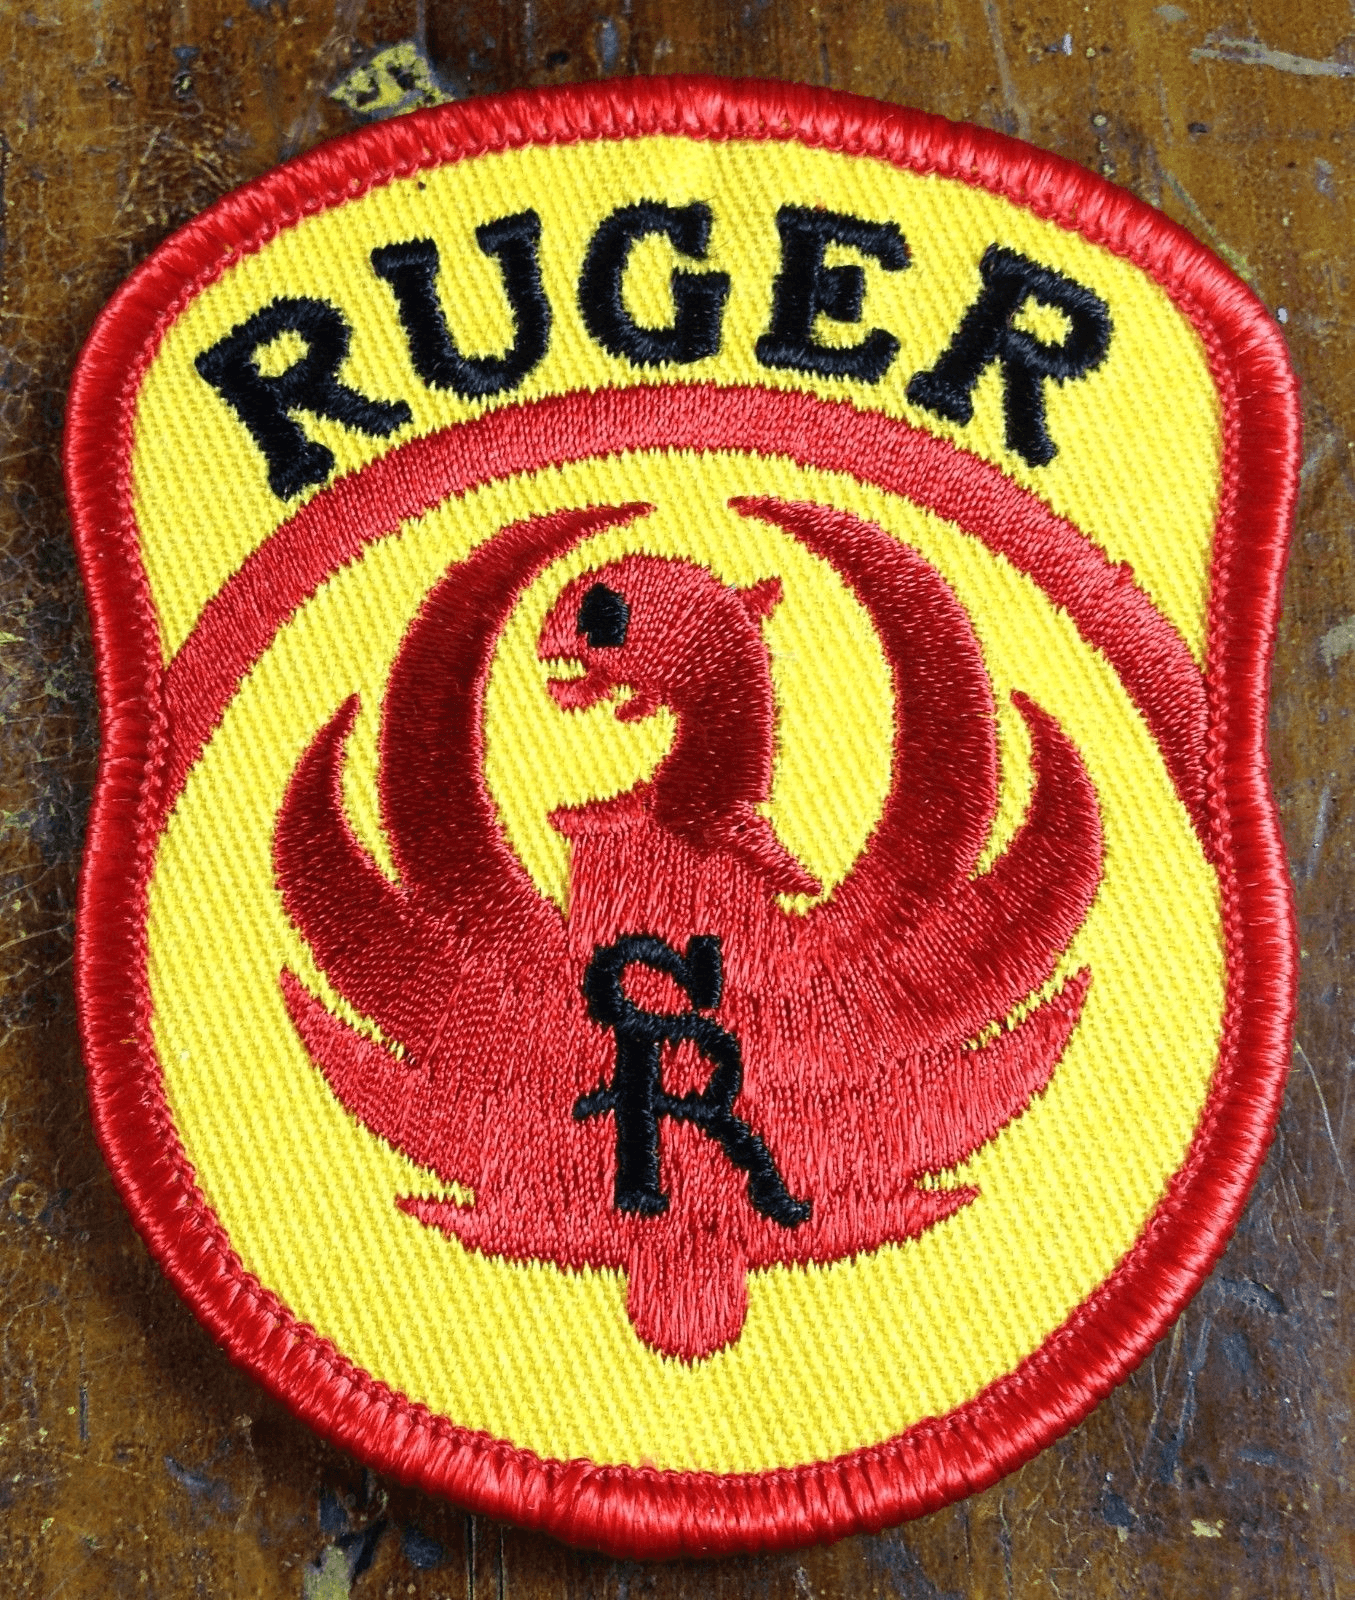 Yellow Bird with Red Circle Logo - Ruger Firearms Guns Company Yellow with Red Phoenix Bird Logo